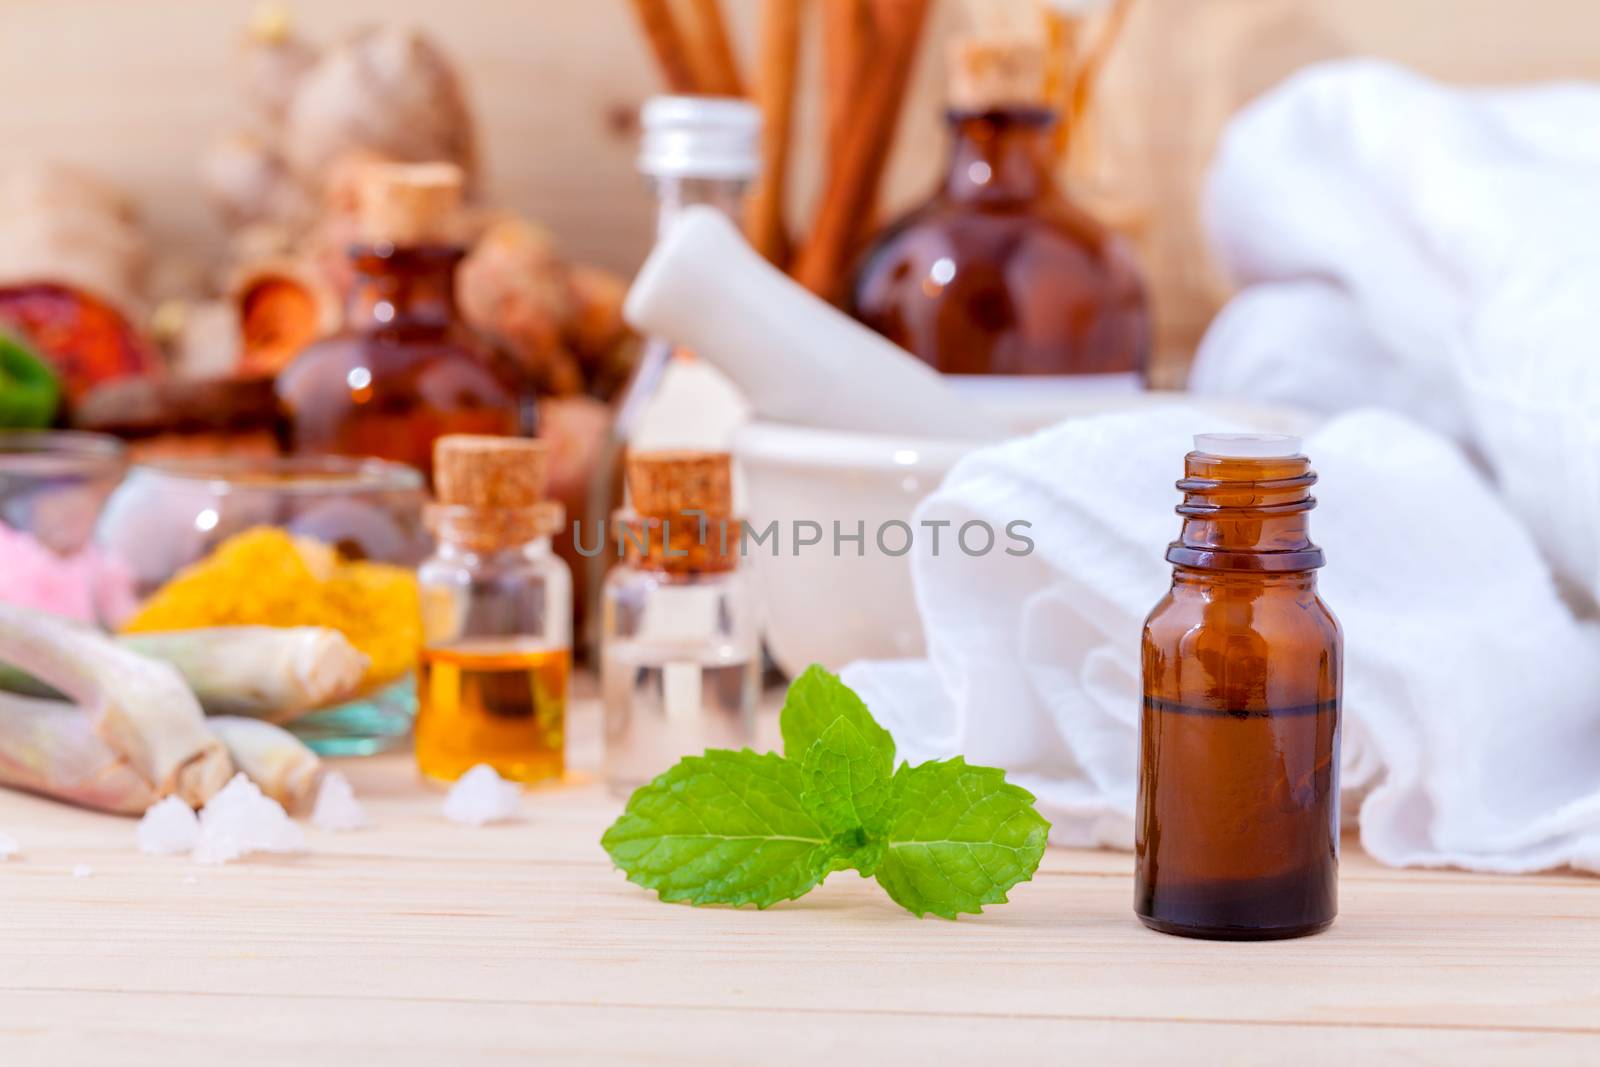 Natural Spa Ingredients Aromatherapy and Natural Spa theme  on wooden background.